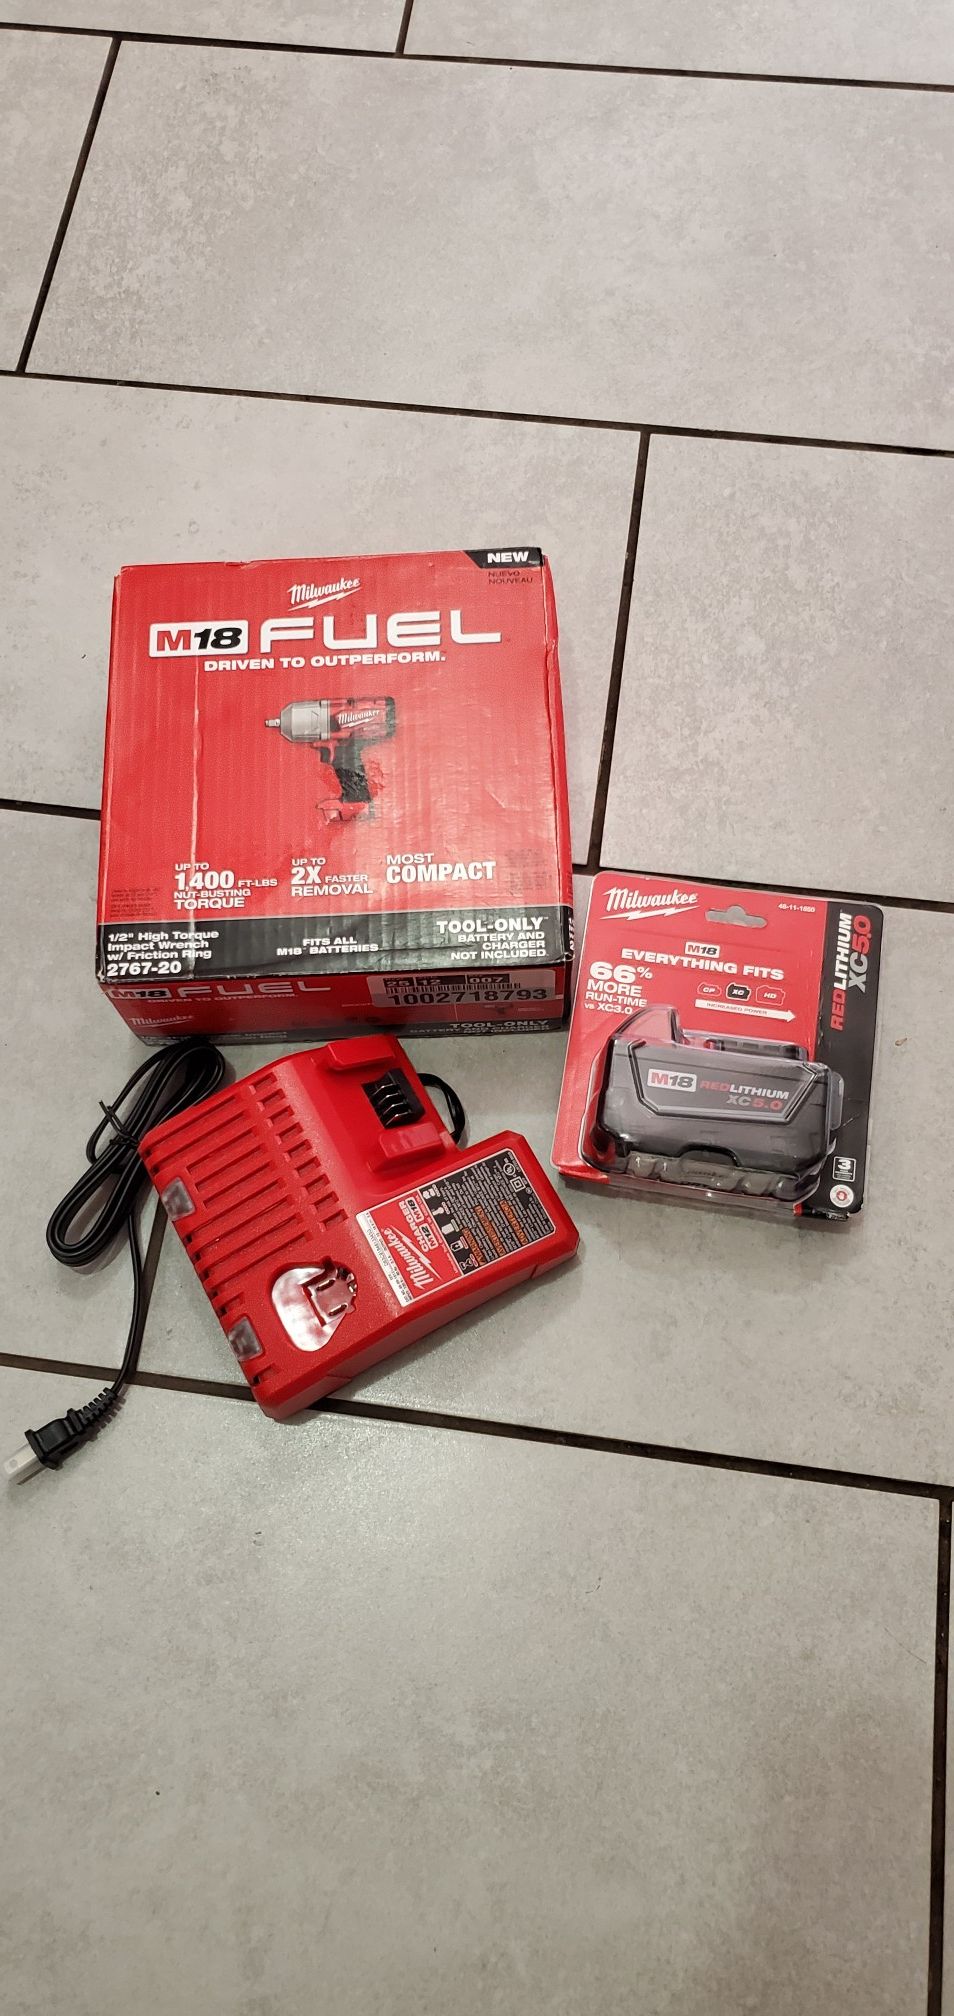 MILWAUKEE M18 VT FUEL BRUSHLESS IMPACT WRENCH 1/2,,,,,1400 FT TORQUE W BATTERIE 5.0 AND CHARGER SET NEW NUEVO